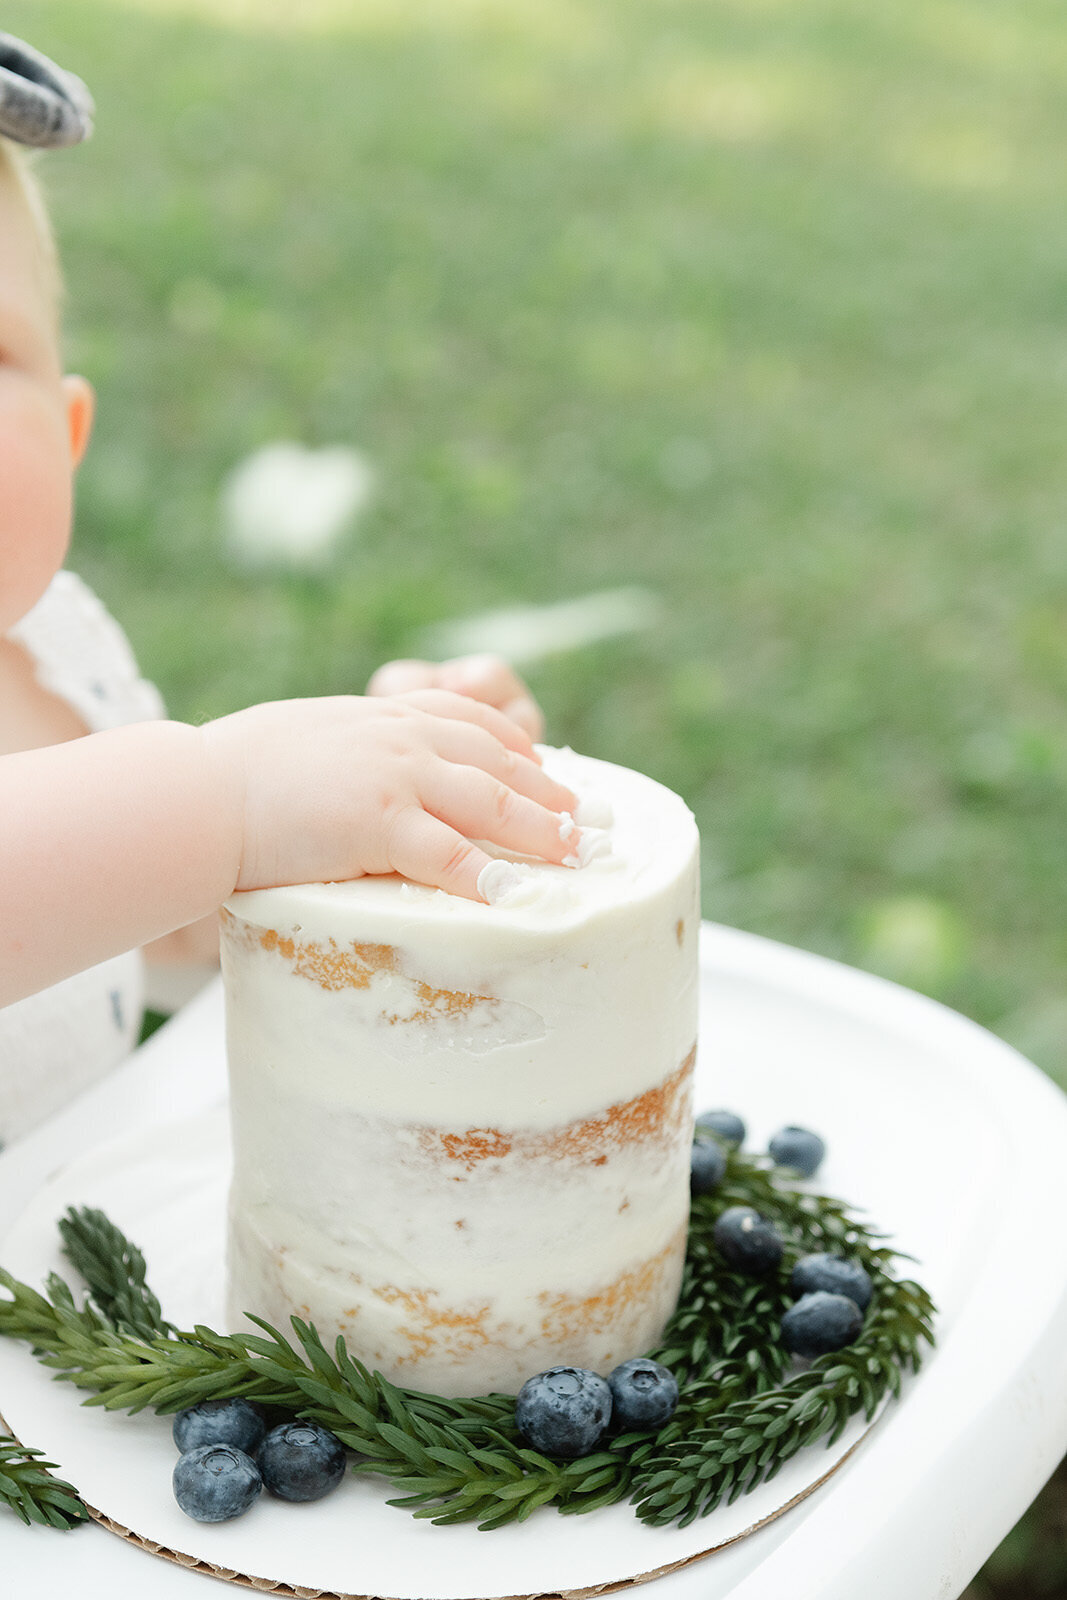 A baby's hand on a smash cake captured by a destin family photographer.